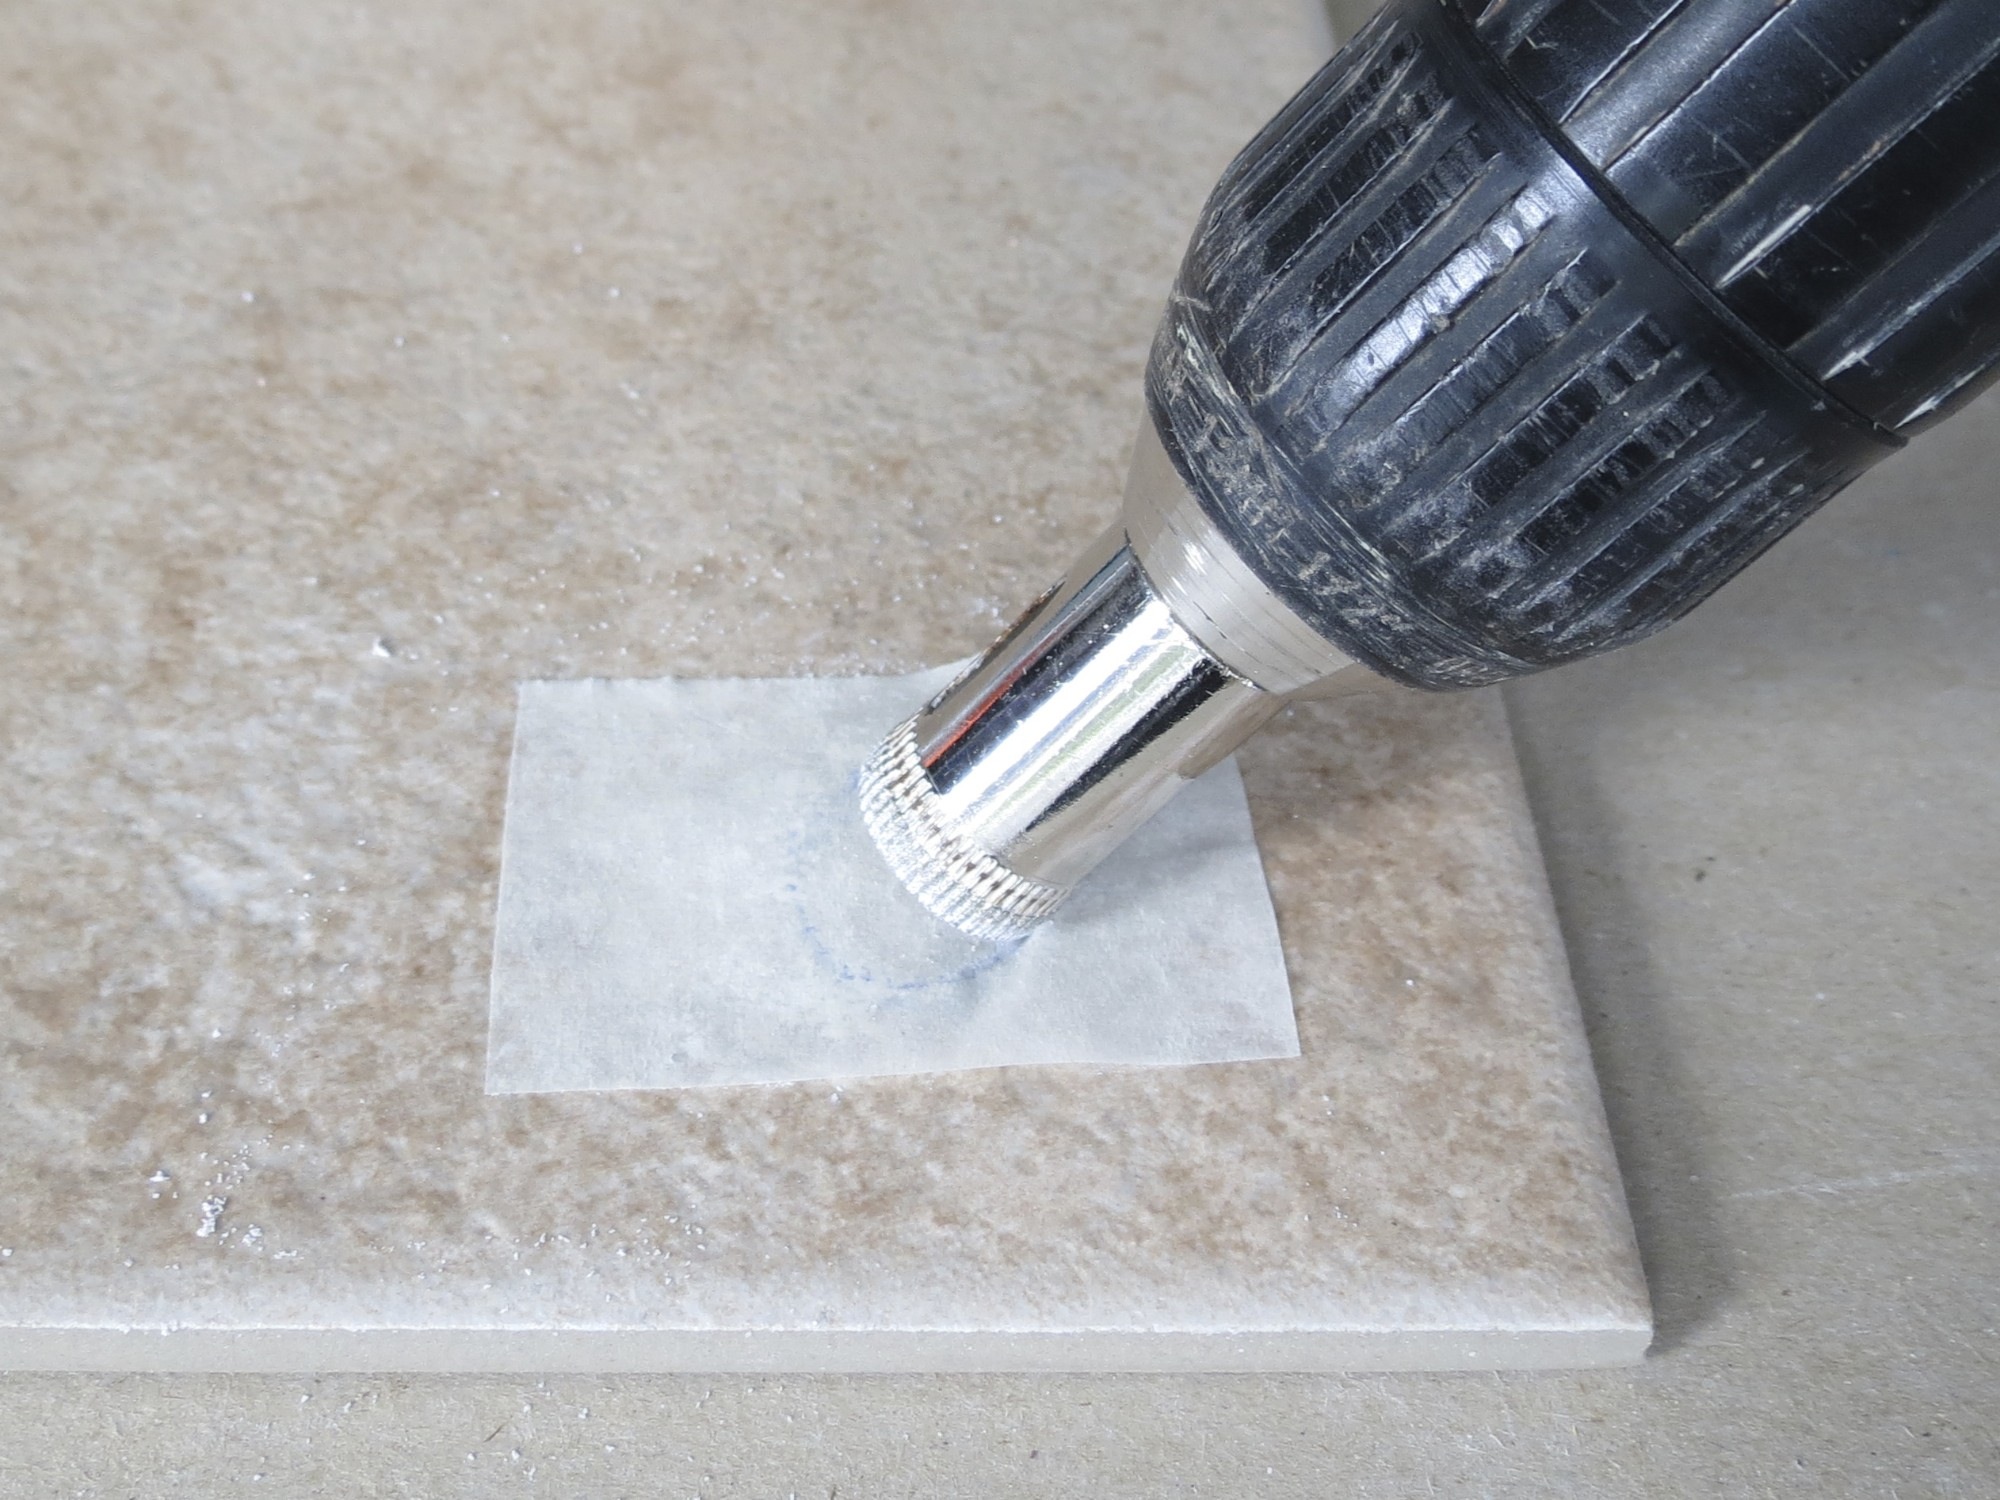 Julian Cassells Diy Blog Blog Archive Drilling Into Porcelain Tiles How To Diy What To Use Where To Buy